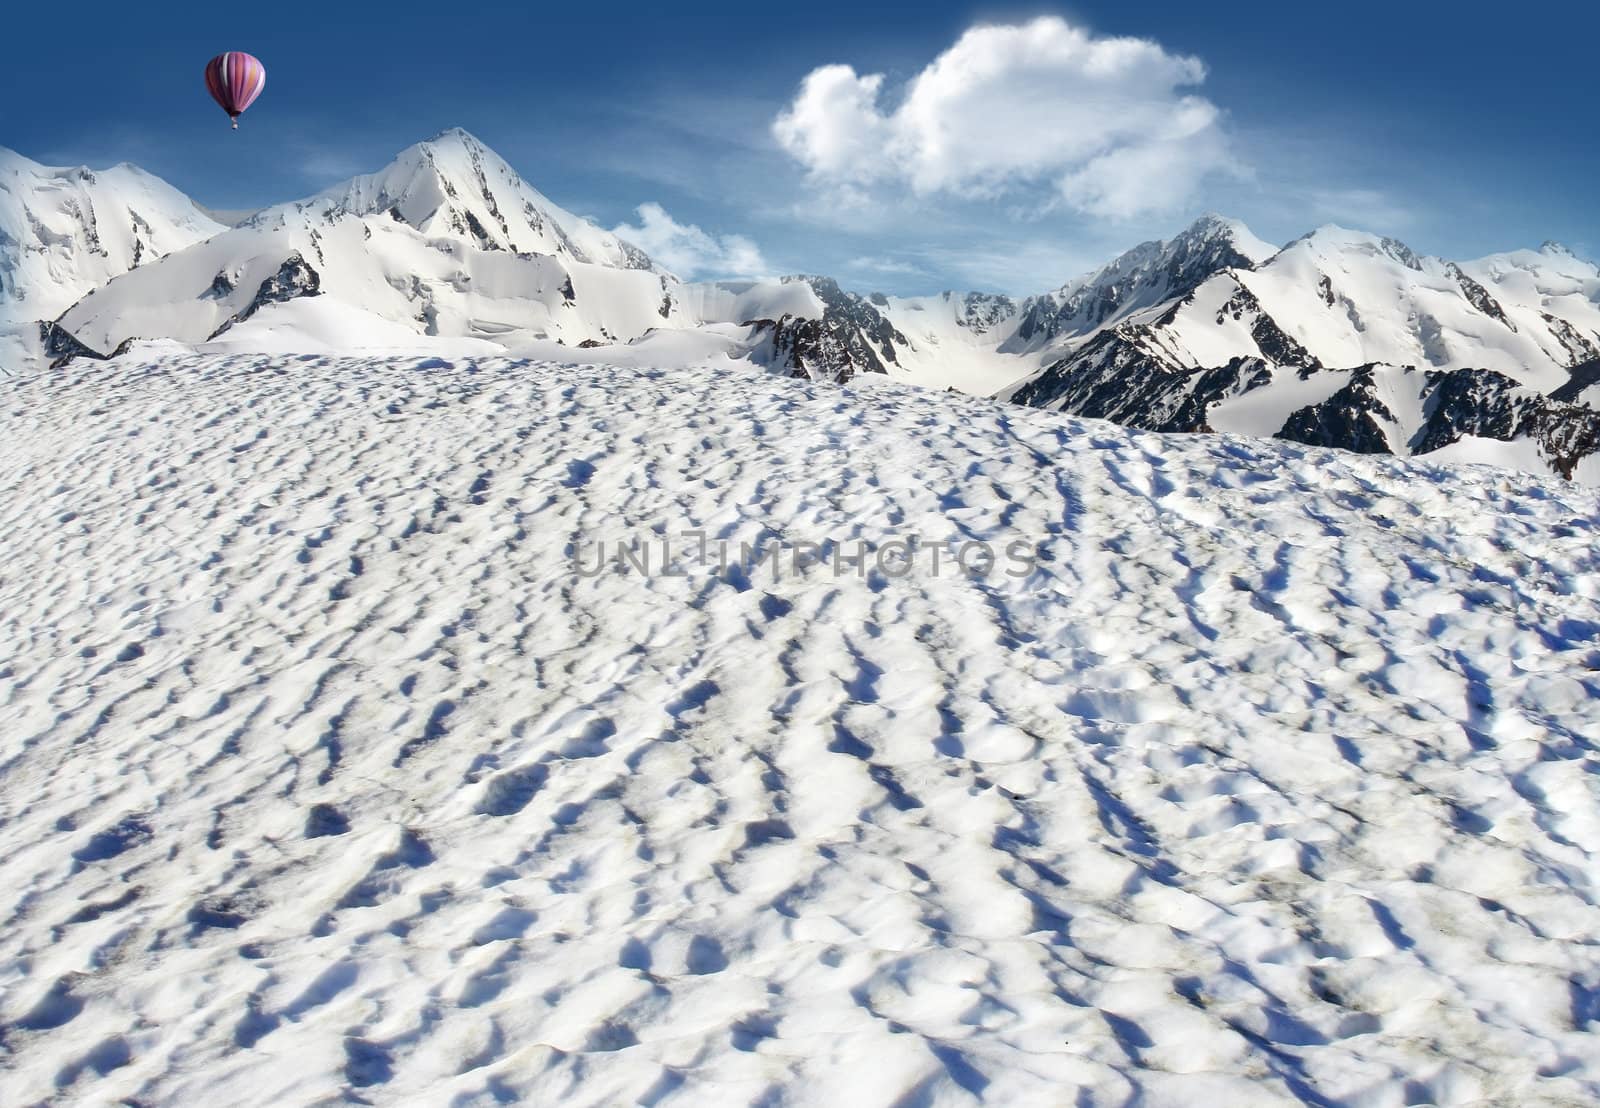 Mountain landscape: snowfield with mountains and glaciers and hot air balloon flying in the sky